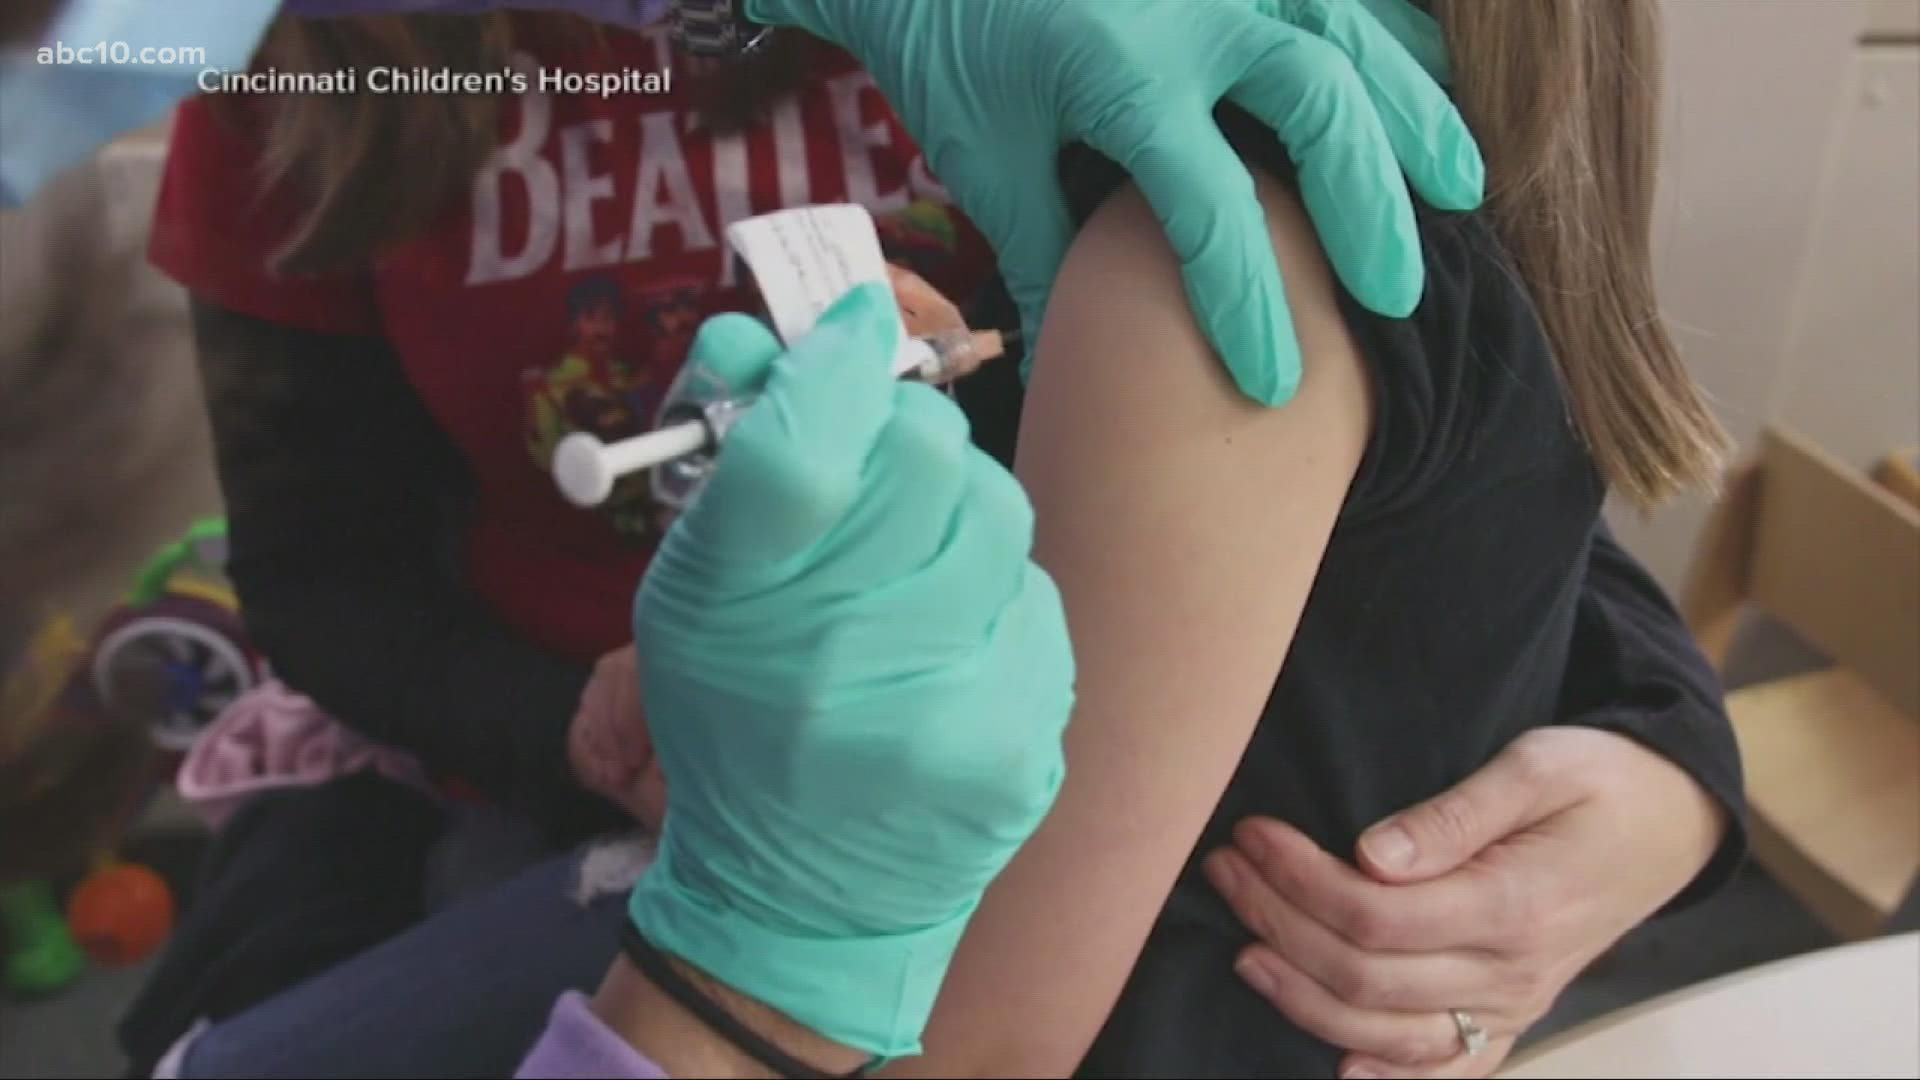 ABC10 reached out to several Sacramento-area counties to see when they would start administering the COVID-19 vaccine and here's what we found out.